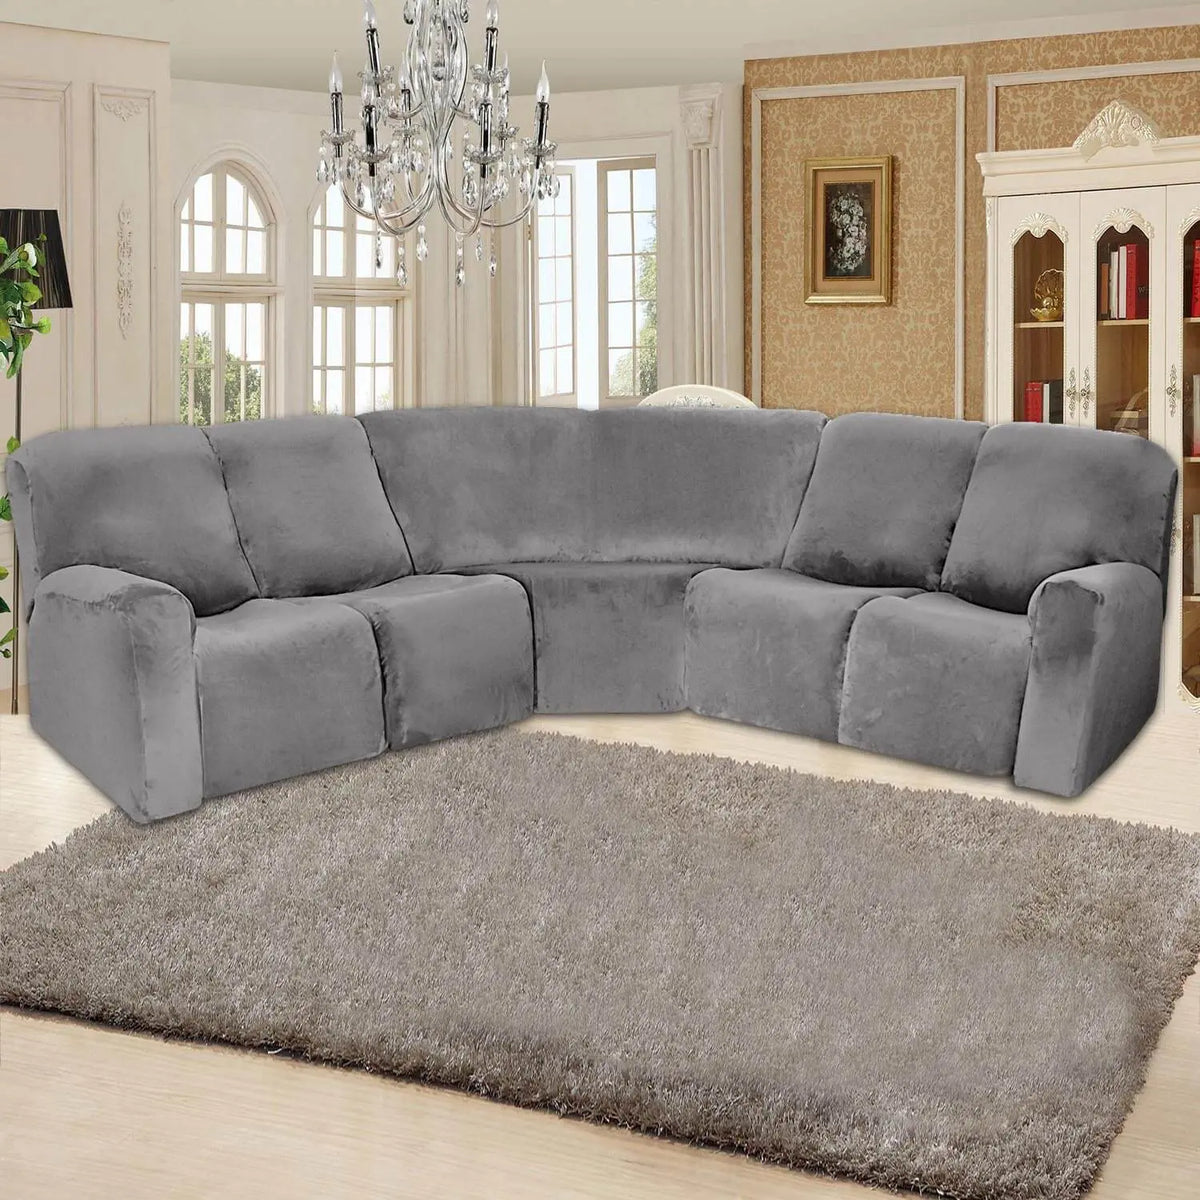 Crfatop 5-seater L Shape Sofa Cover with Recliner